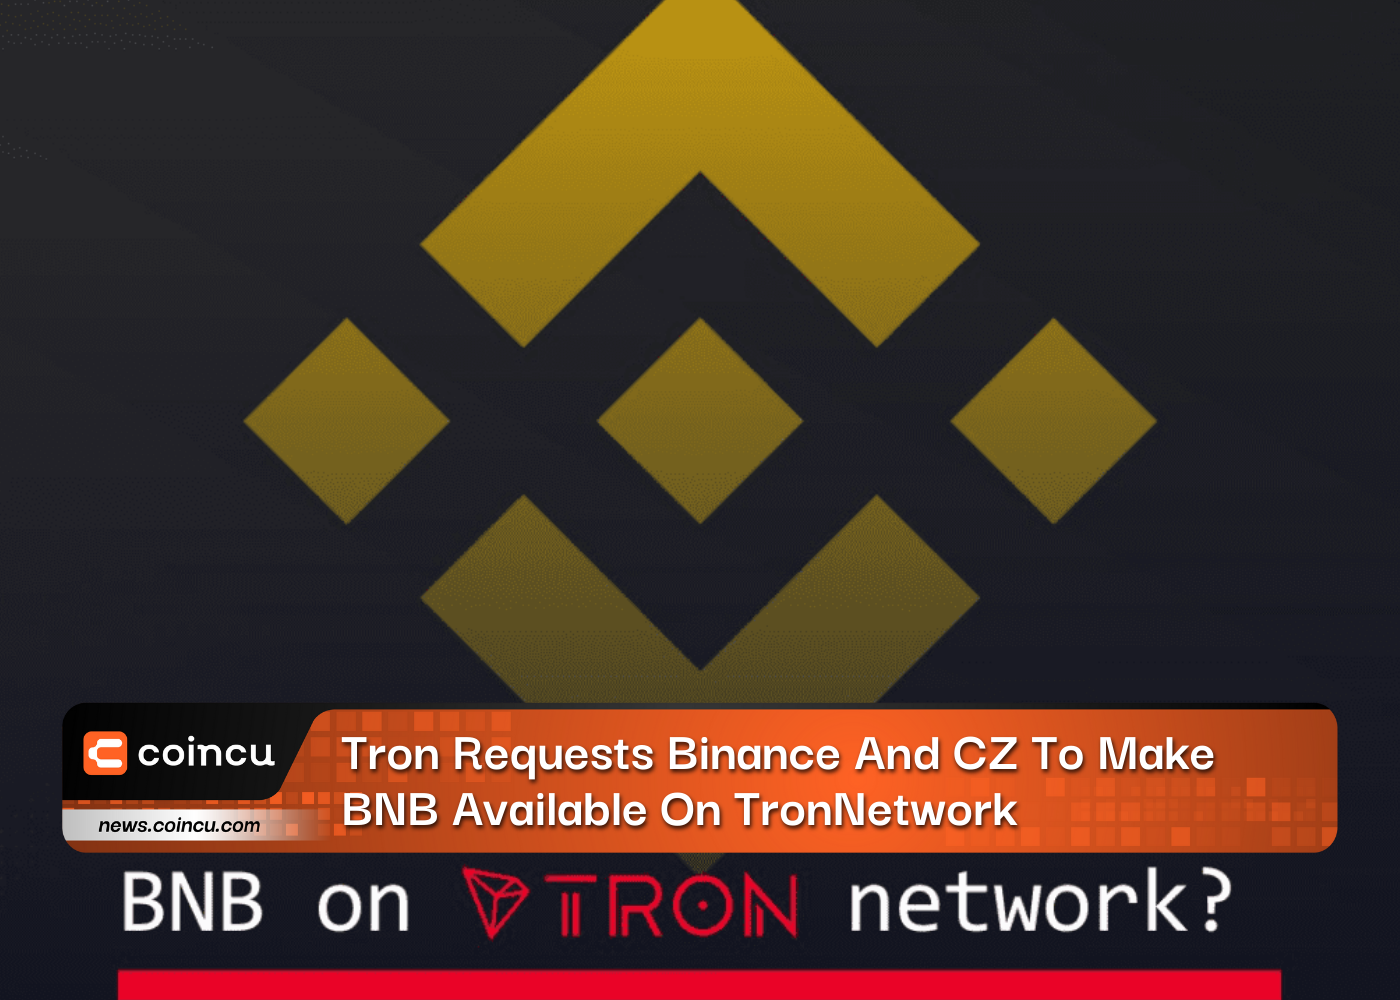 Tron Requests Binance And CZ To Make BNB Available On TronNetwork